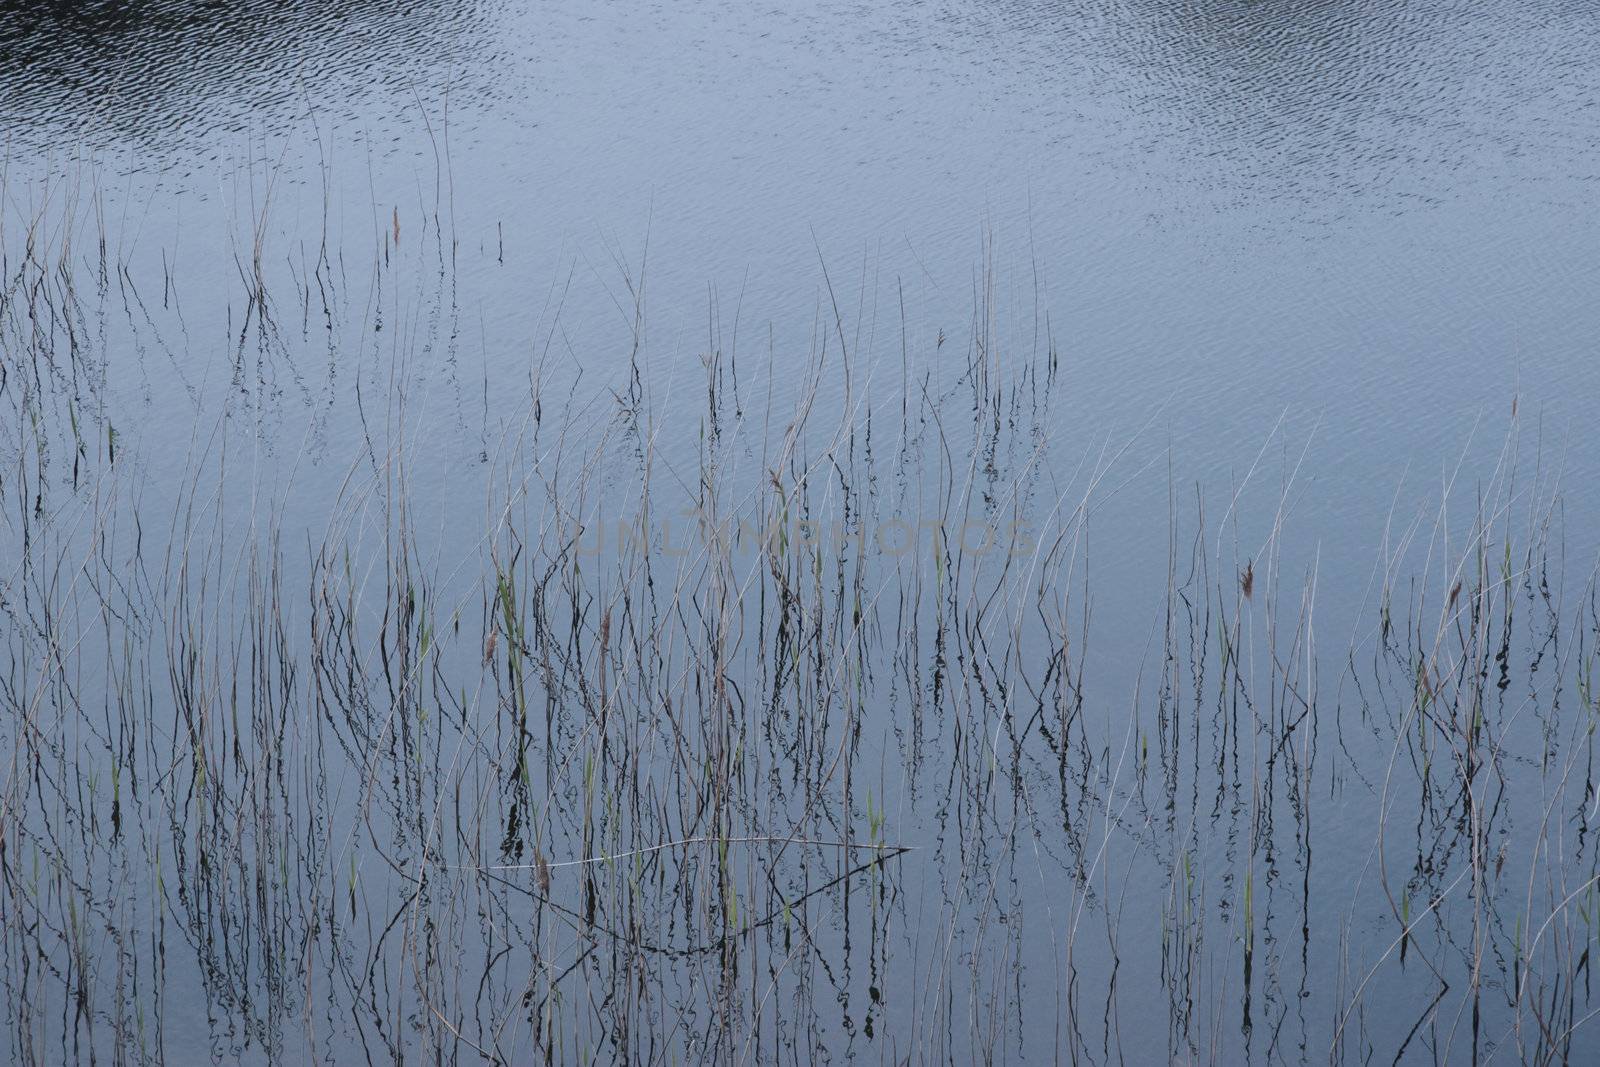 reflections of rushes on a lake